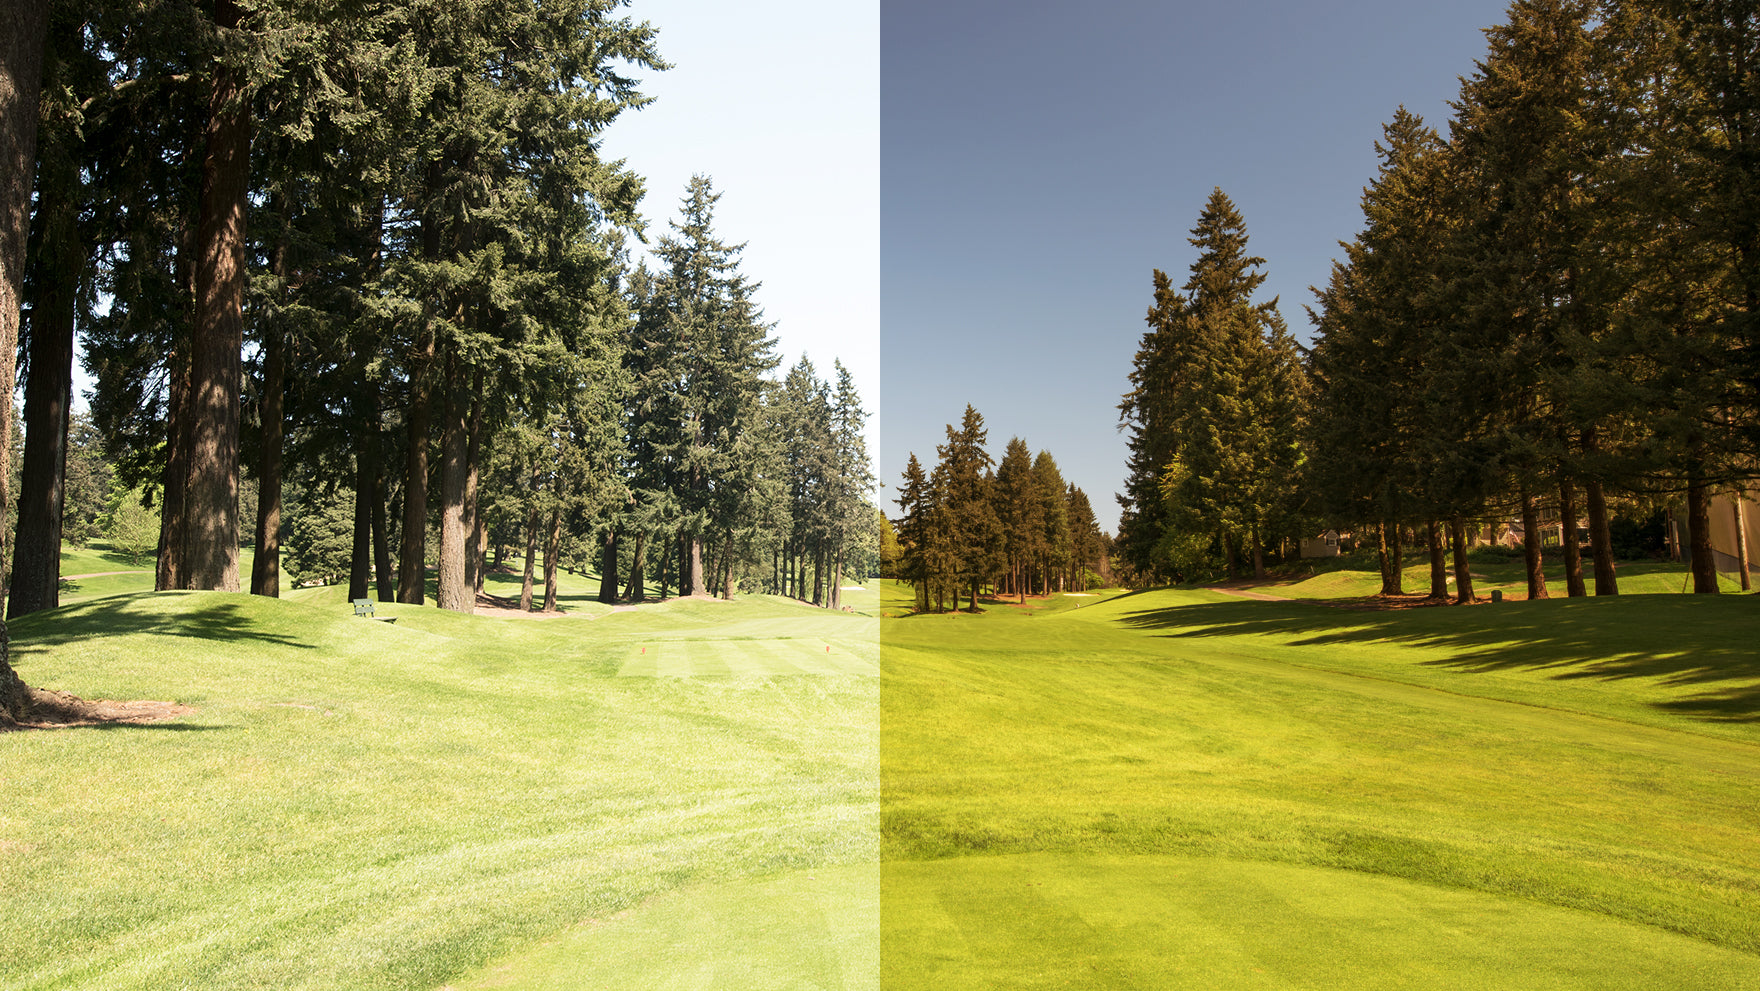 view looking at a golf course through the flash bronze lens on the left versus without a lens on the left